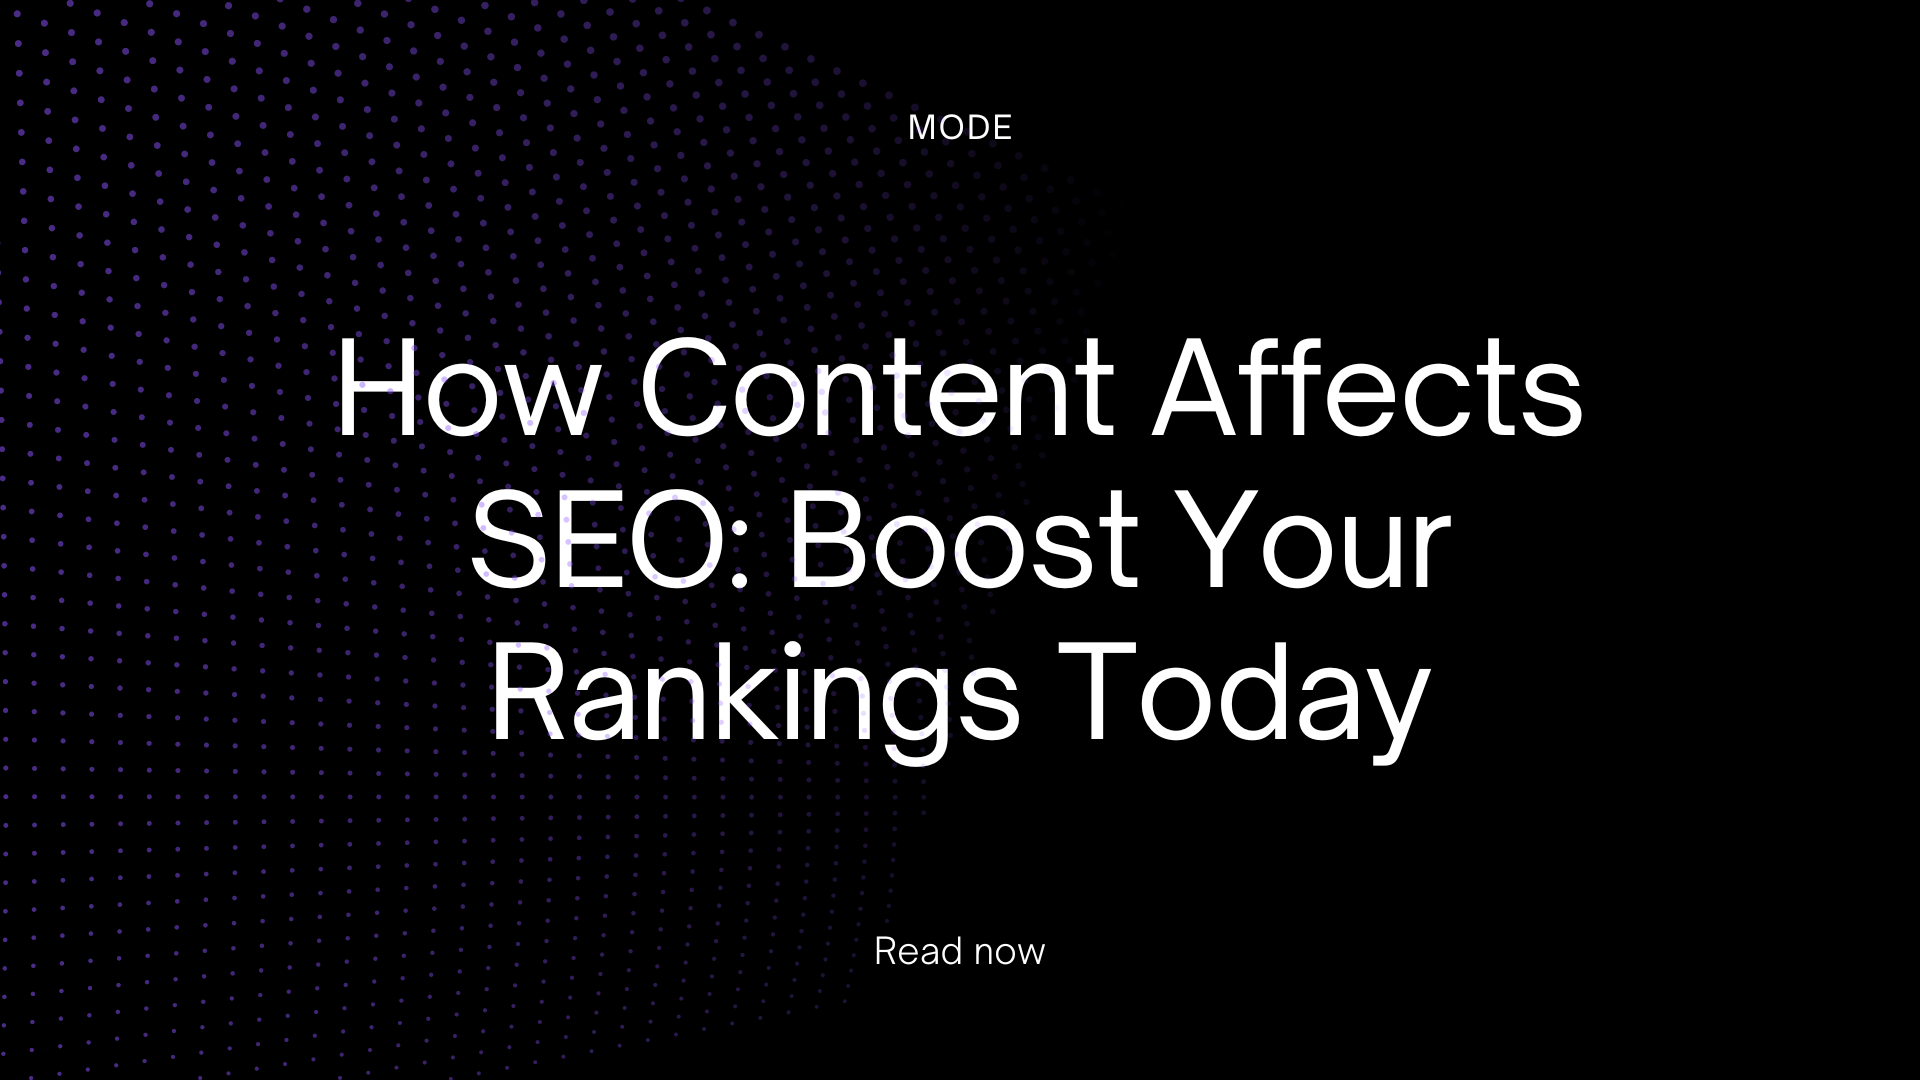 How Content Affects SEO: Boost Your Rankings Today